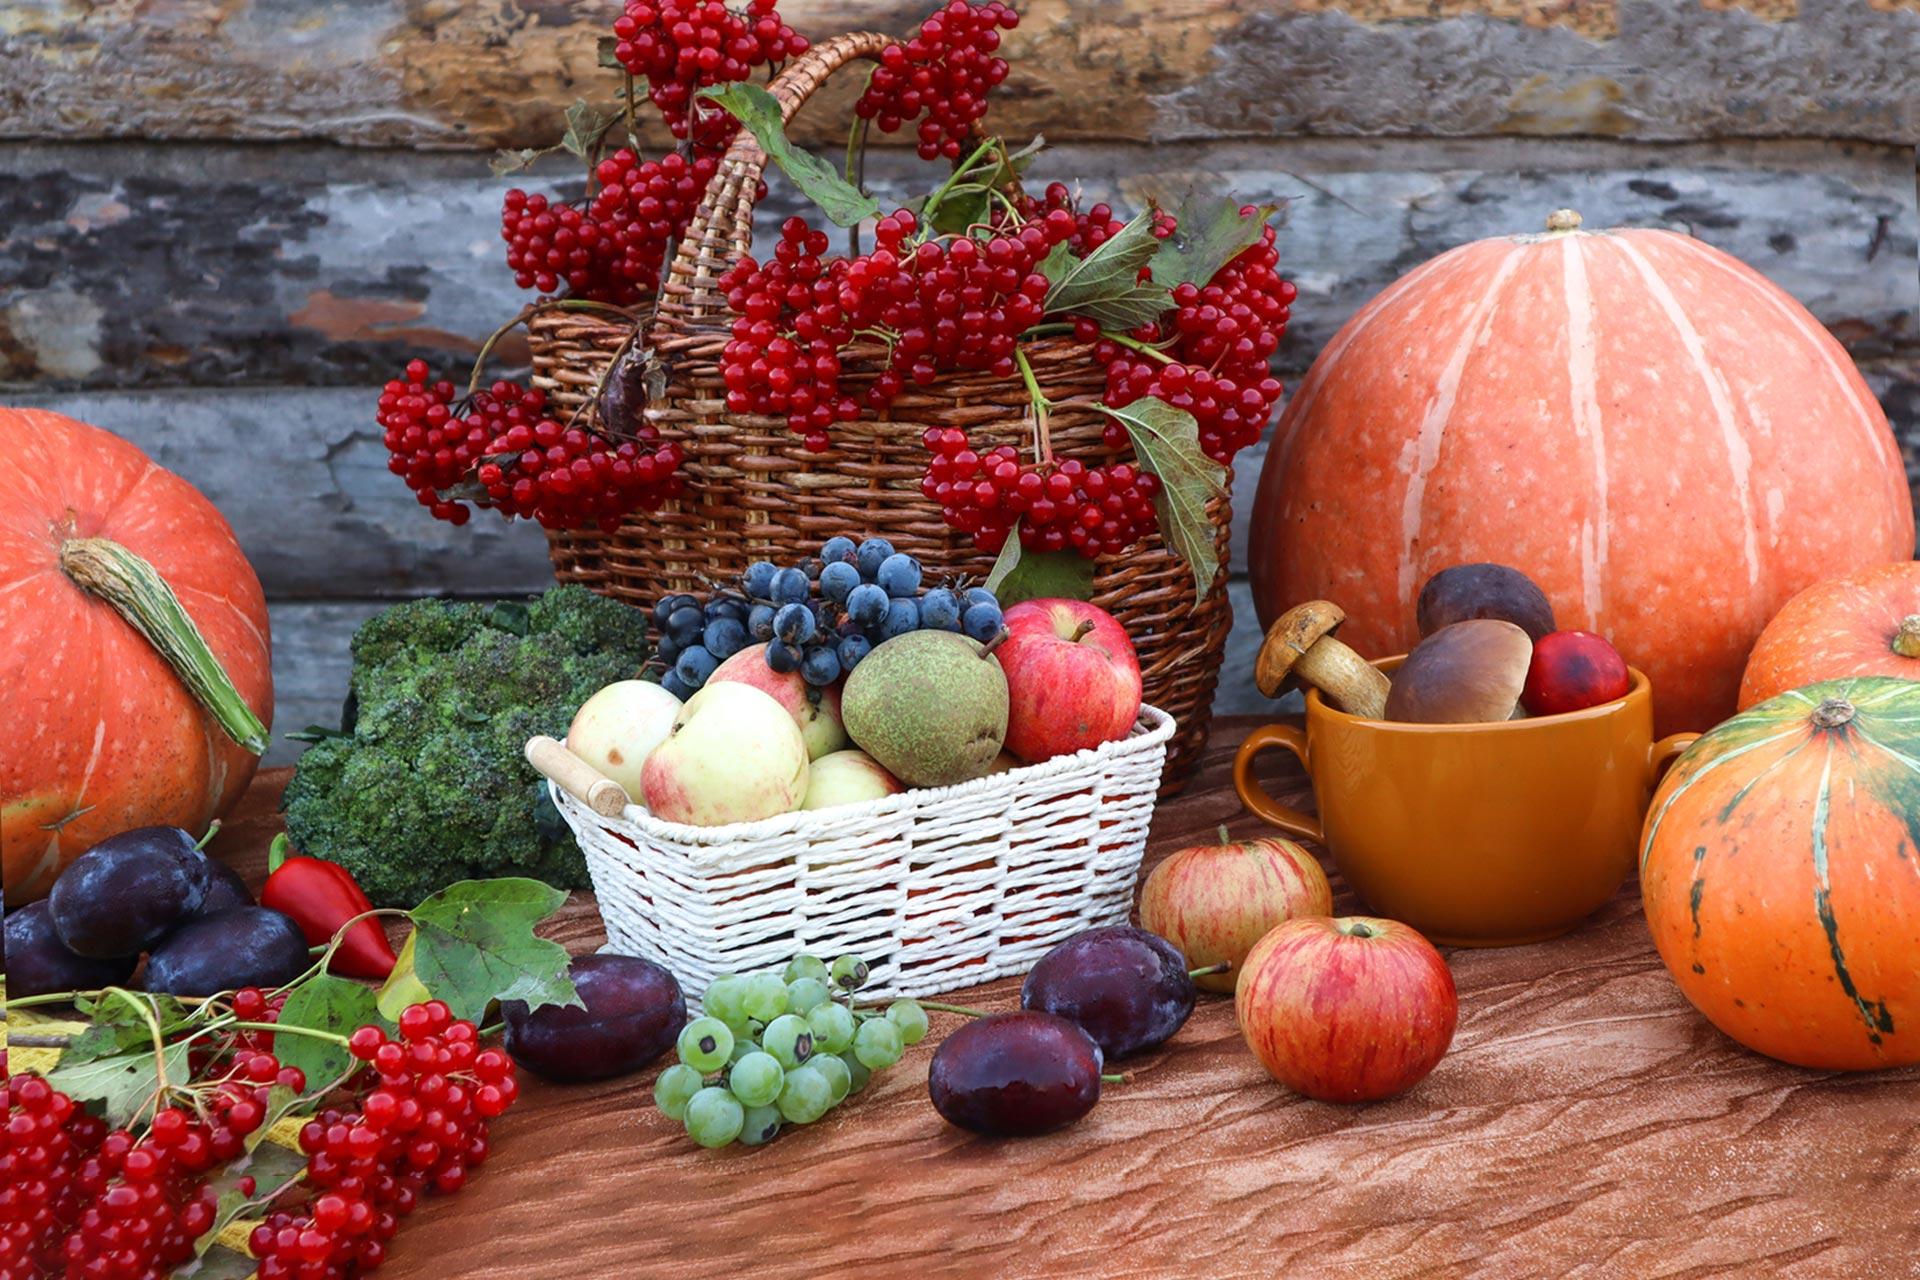 Autumn Season Fruits and Vegetables: Eat Healthy and Tasty